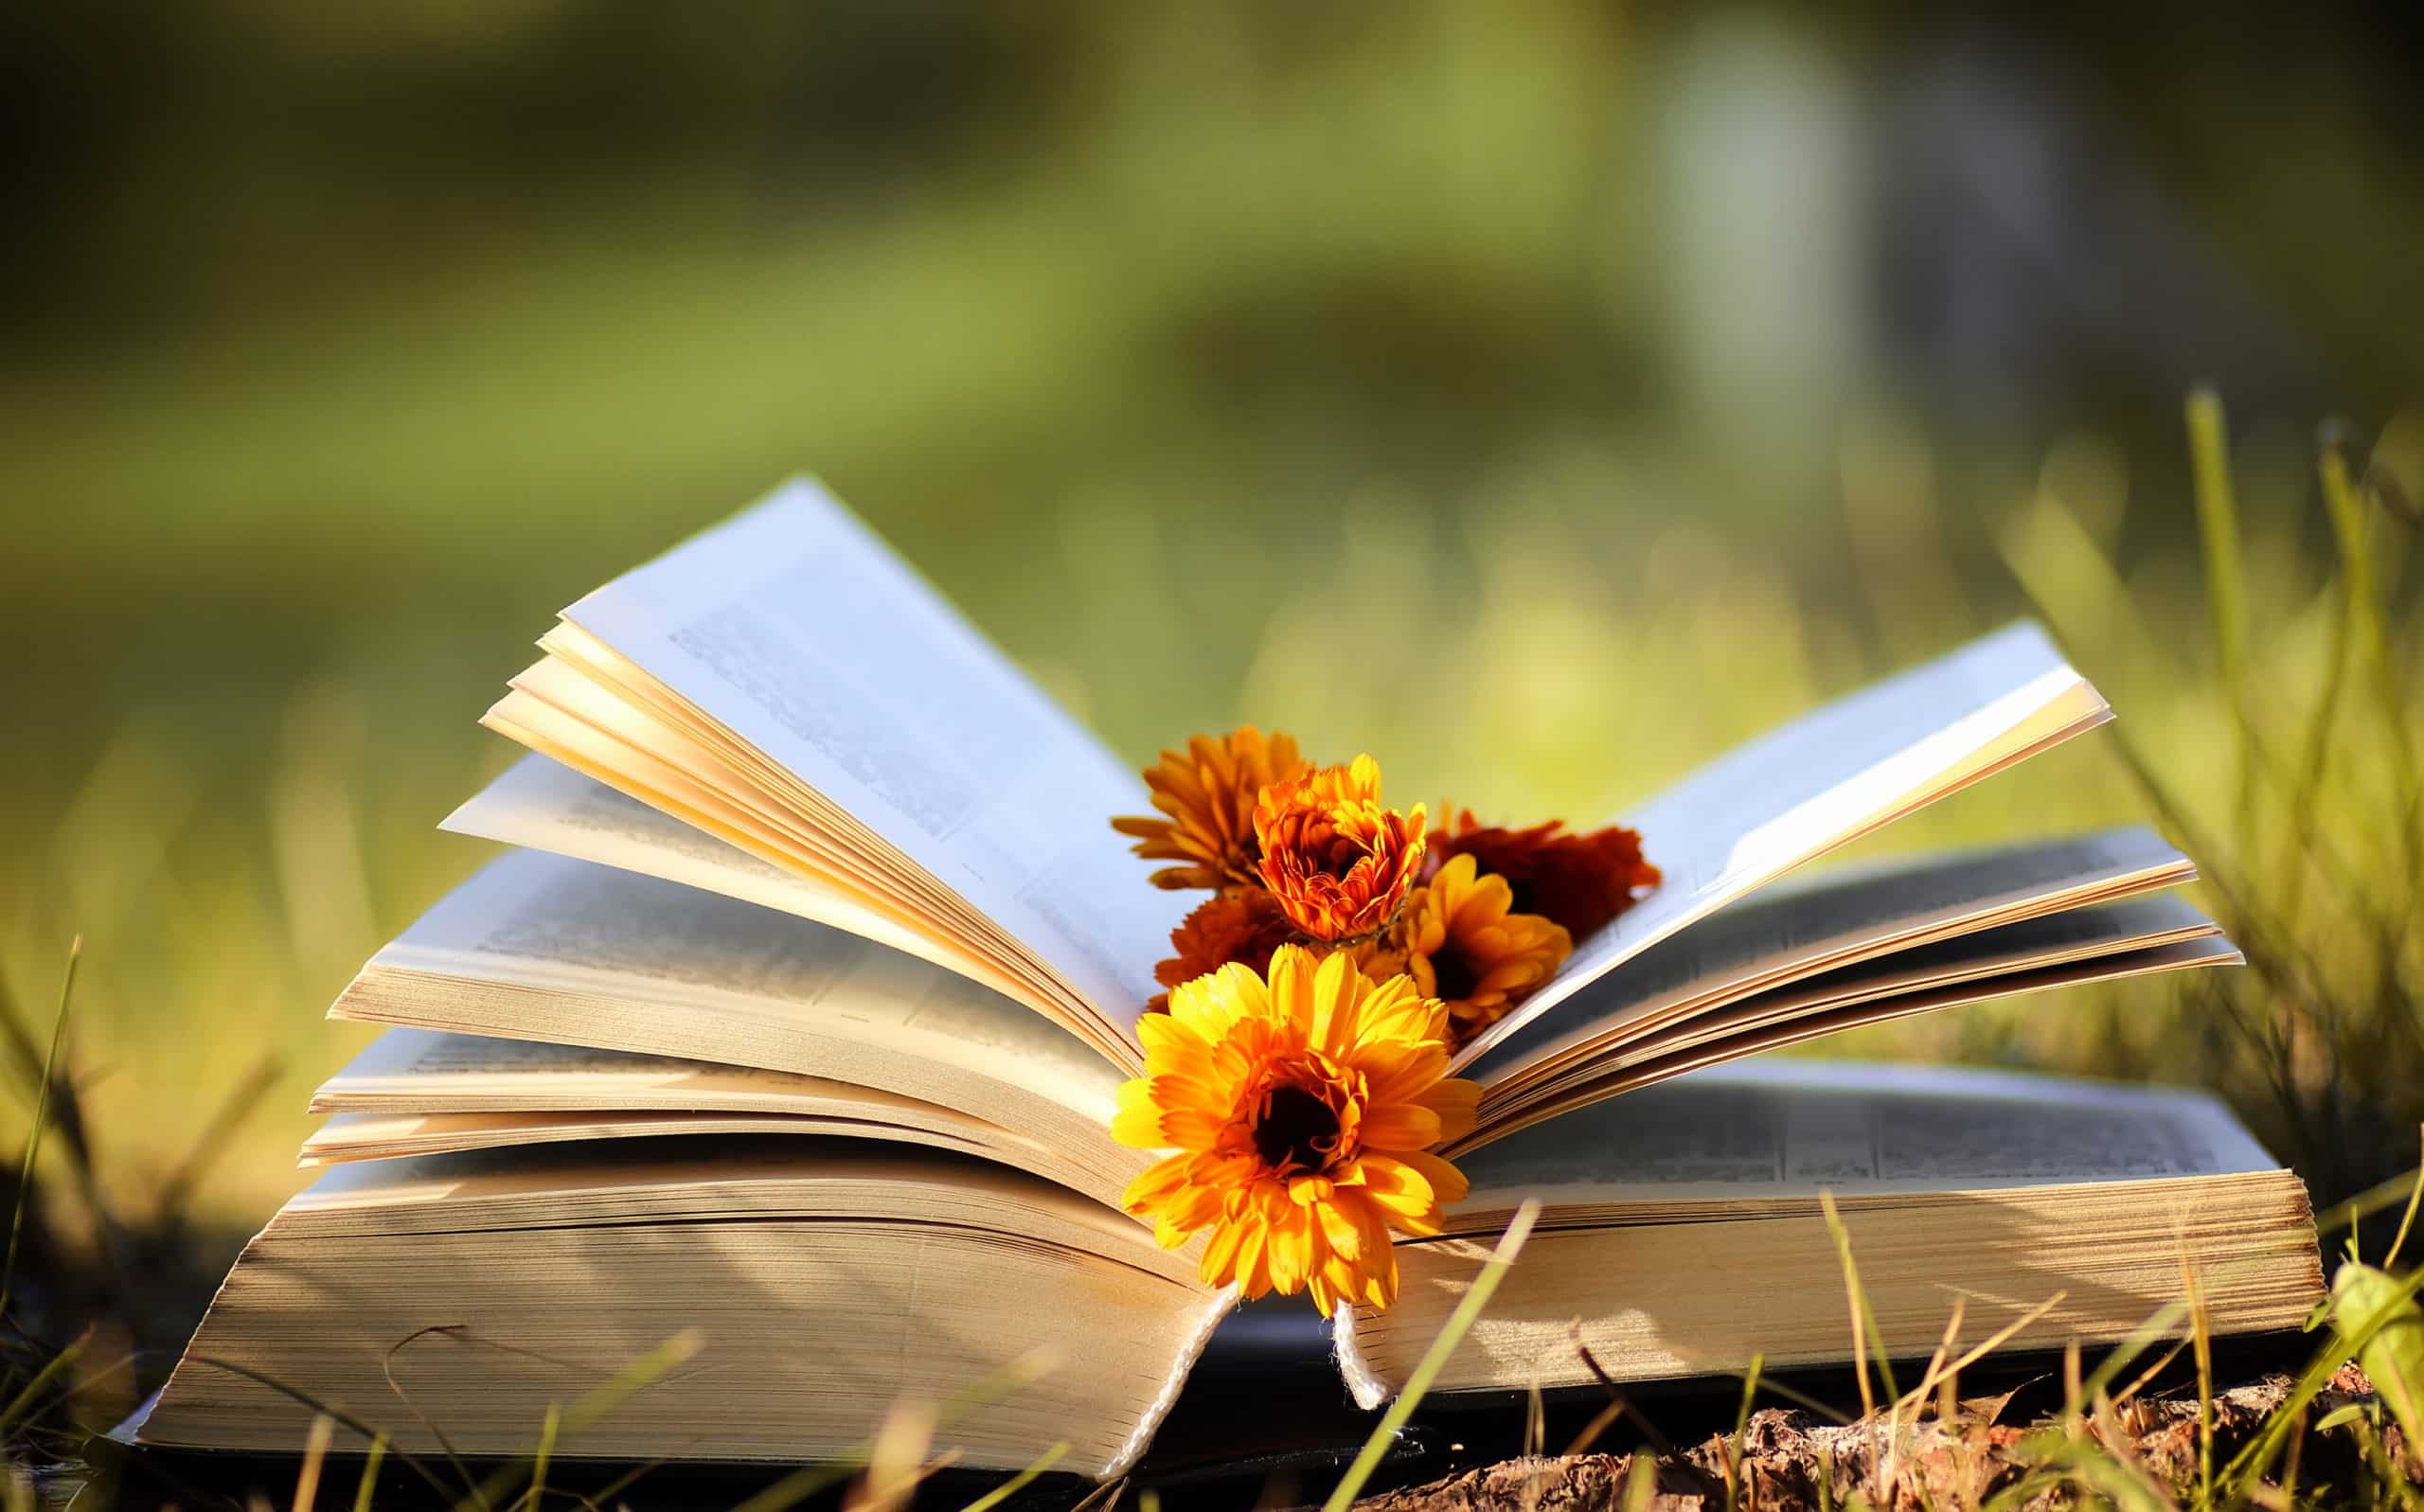 Opened book with flowers inserted in between pages outdoor in autumn.